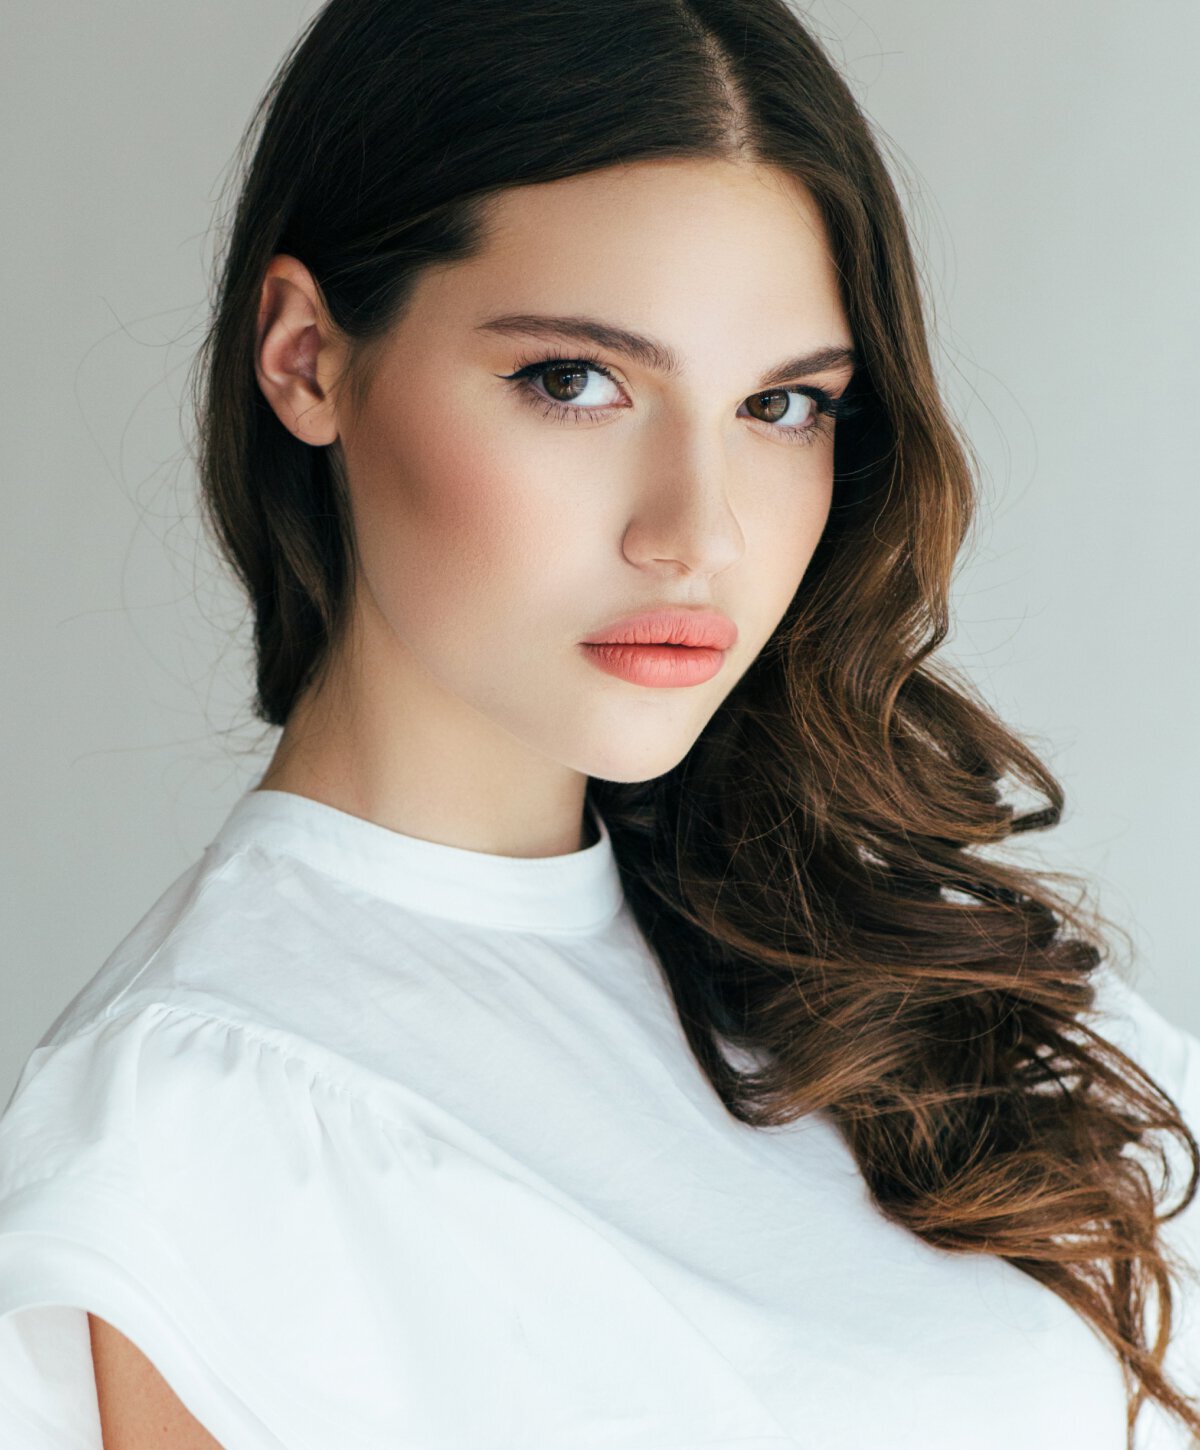 birmingham Rhinoplasty patient model with brown hair wearing a white blouse